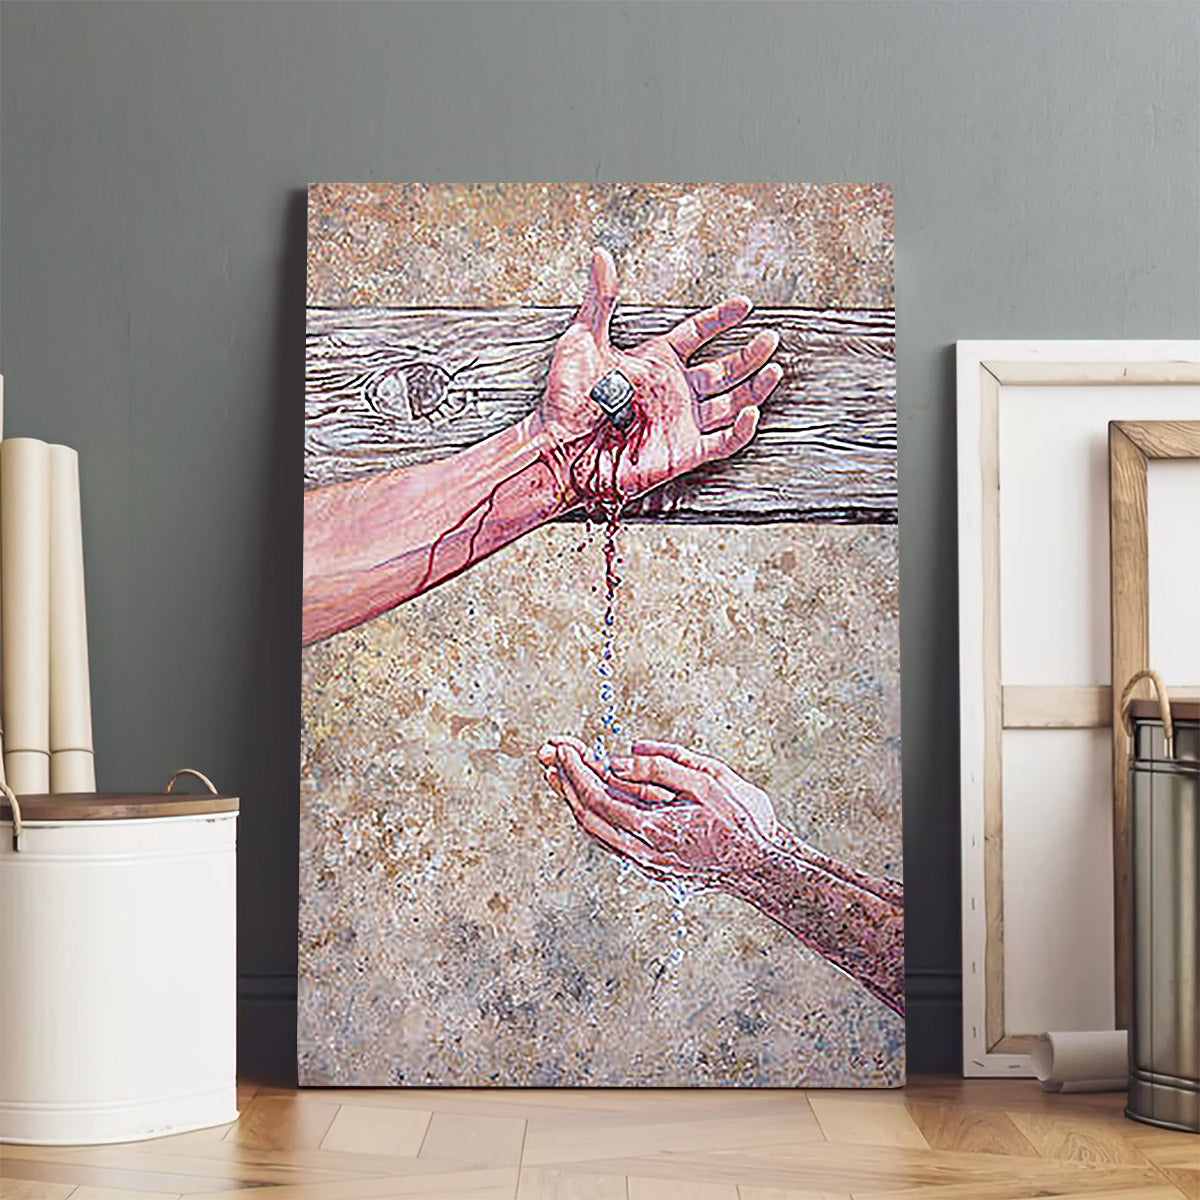 Washed In The Blood Canvas Pictures - Christian Canvas Wall Decor - Religious Wall Art Canvas